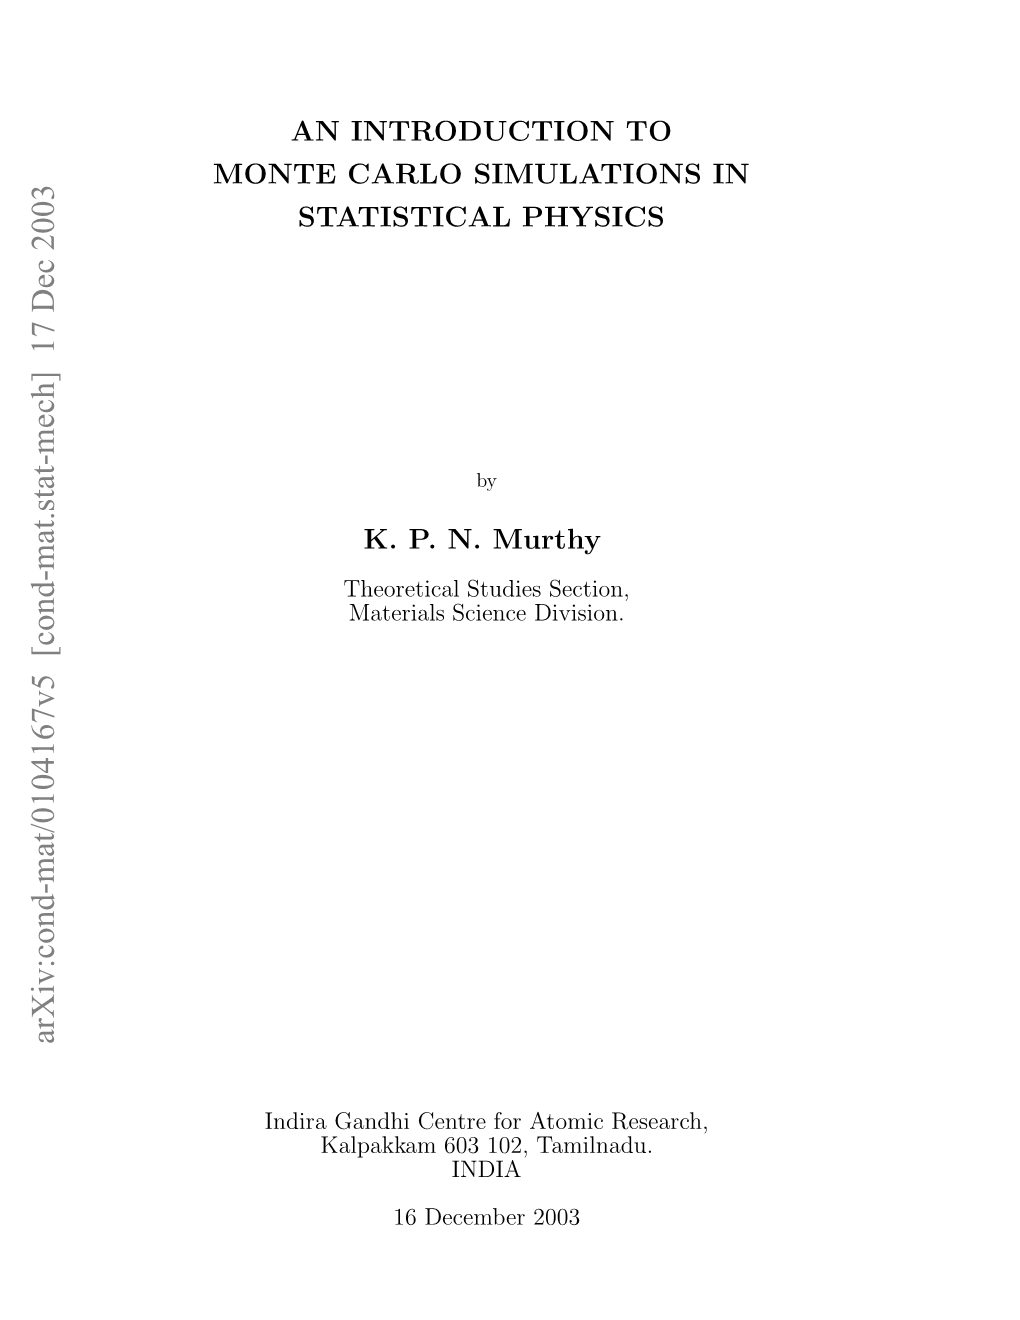 An Introduction to Monte Carlo Simulation of Statistical Physics